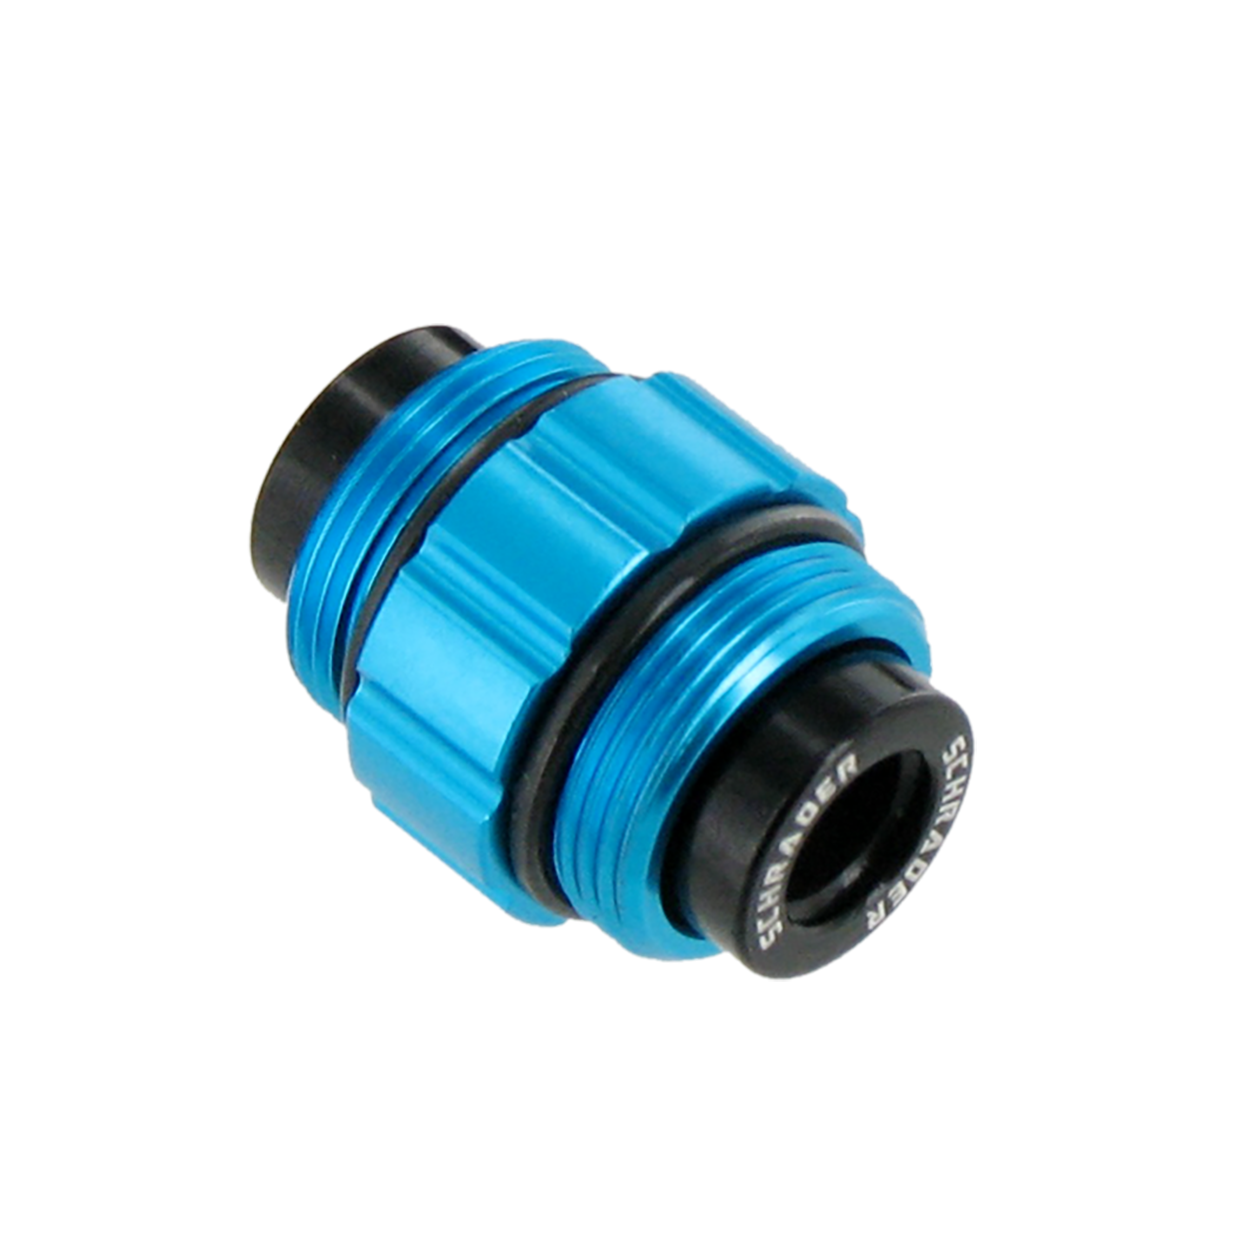 Blue replacement tip for RP-80200 & RP-80300